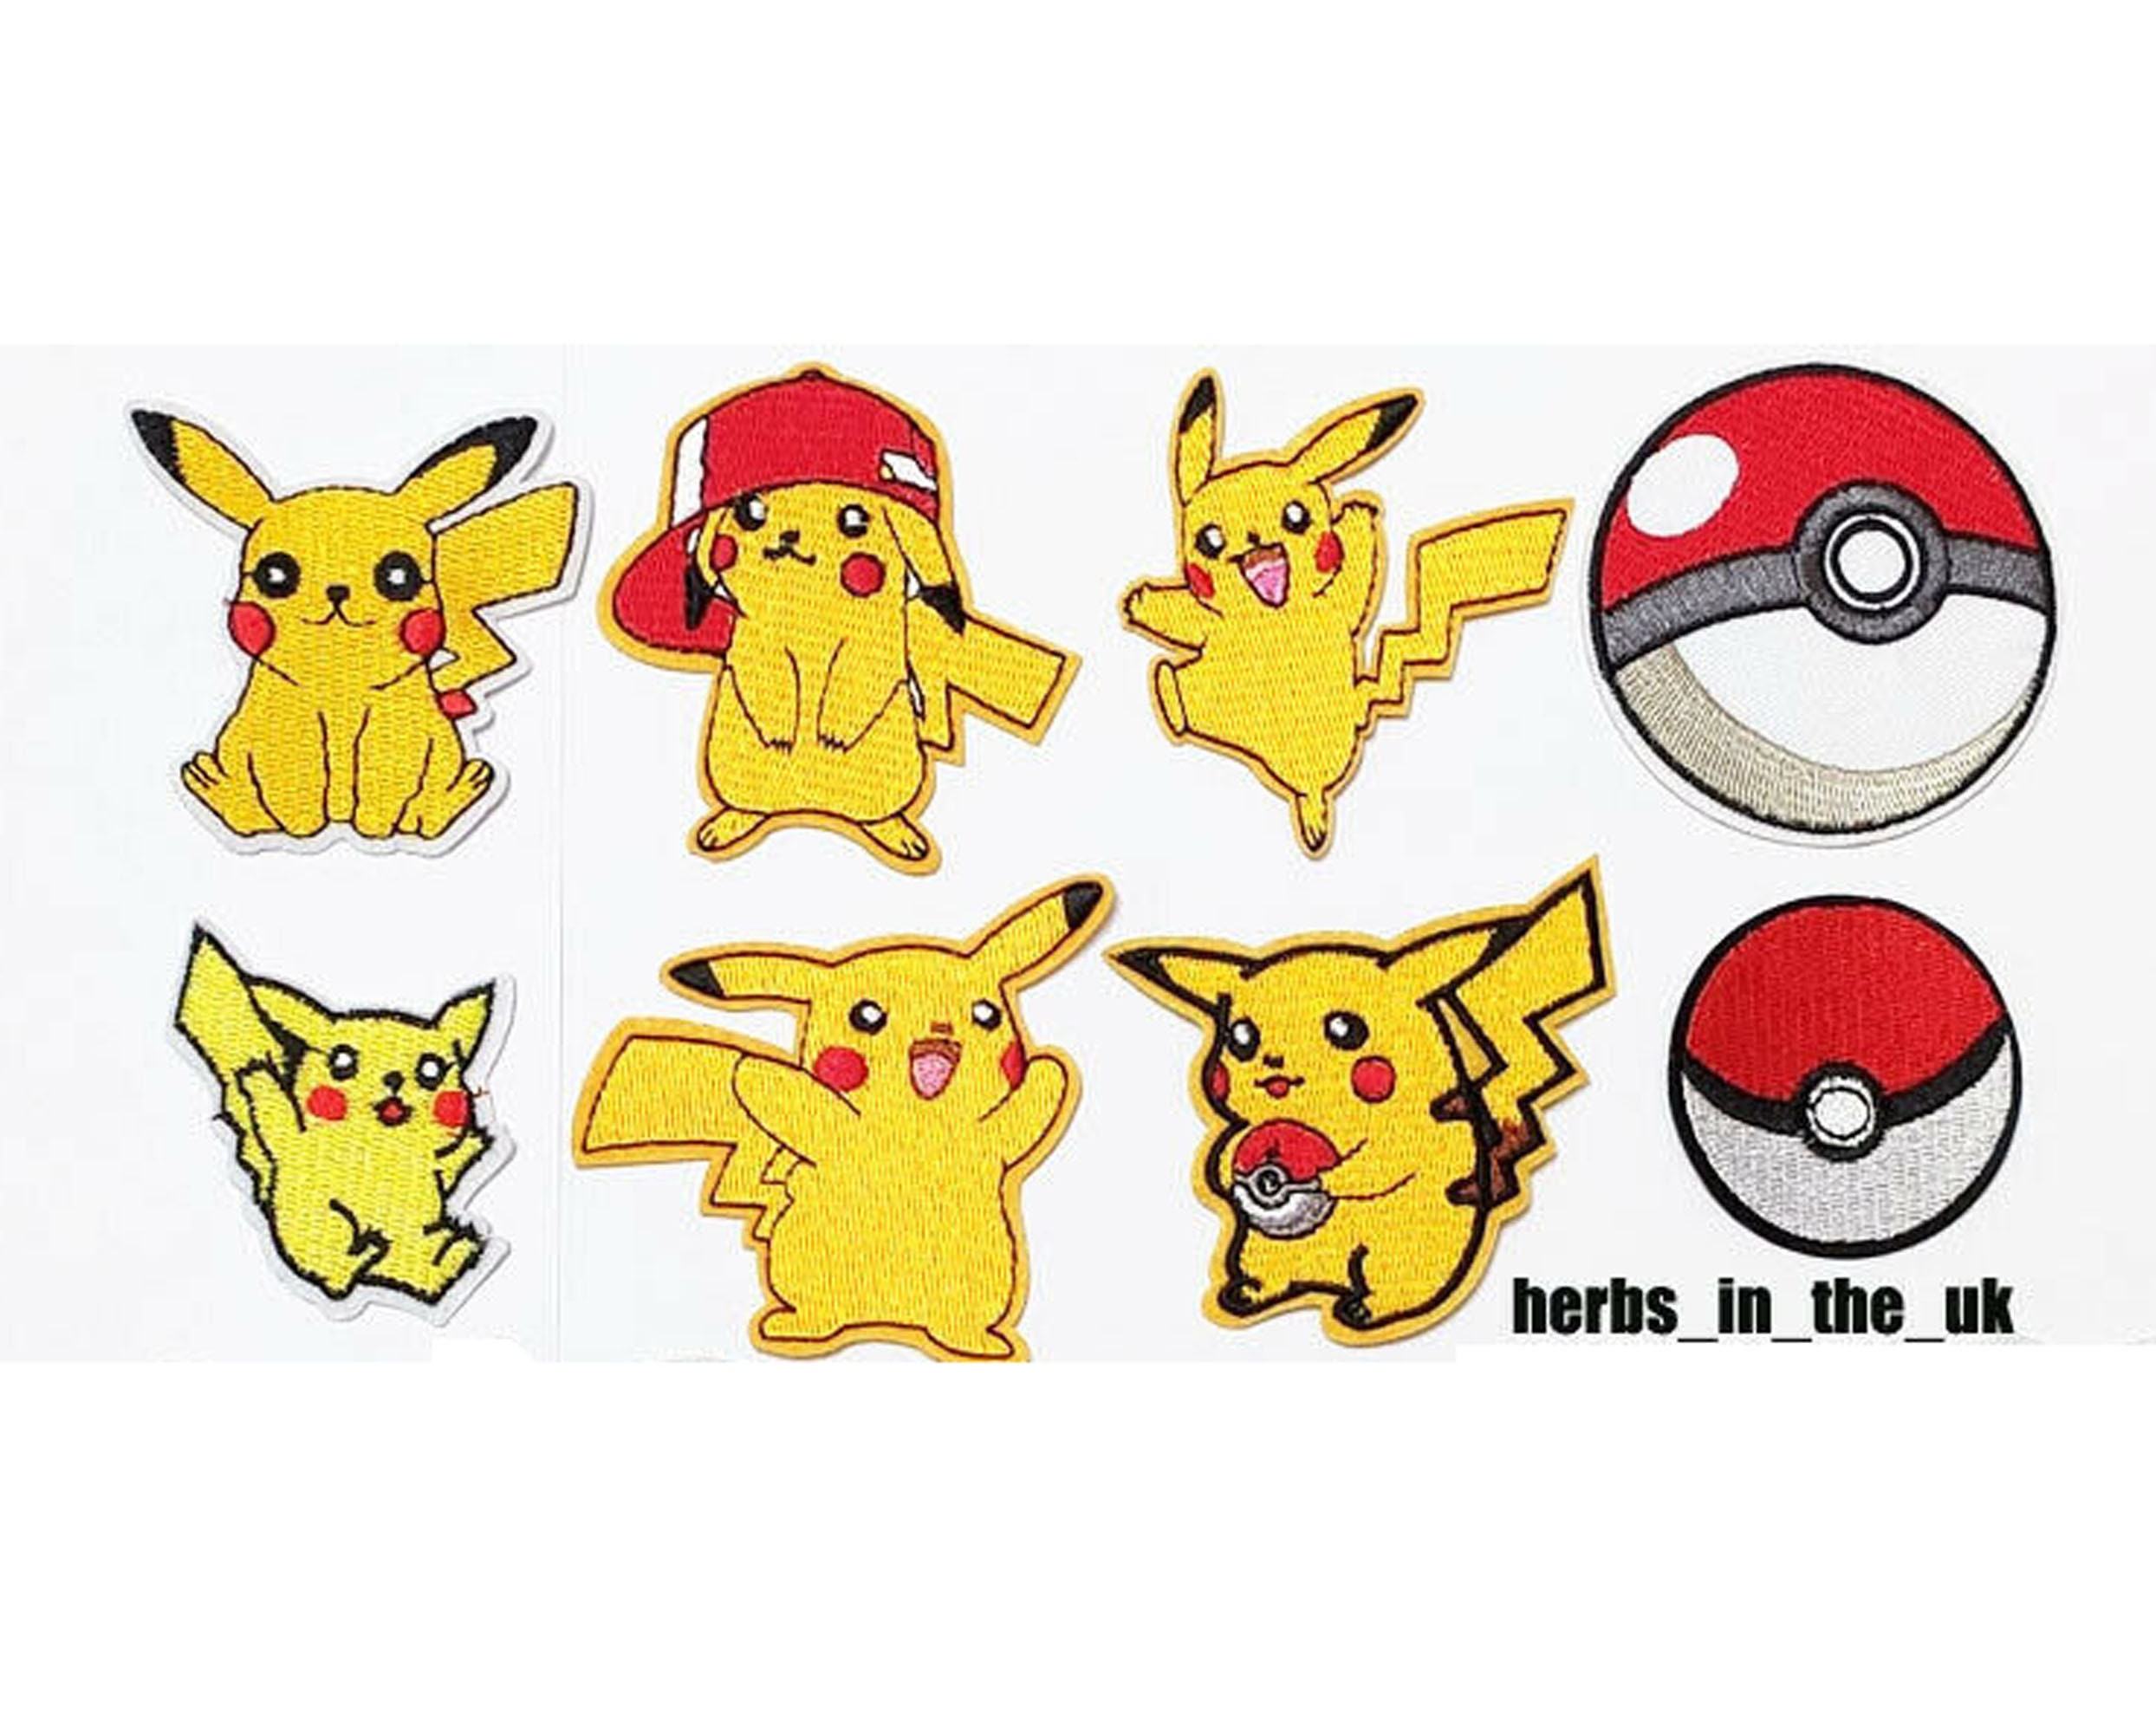 Customize your clothing with Pokemon iron on patches